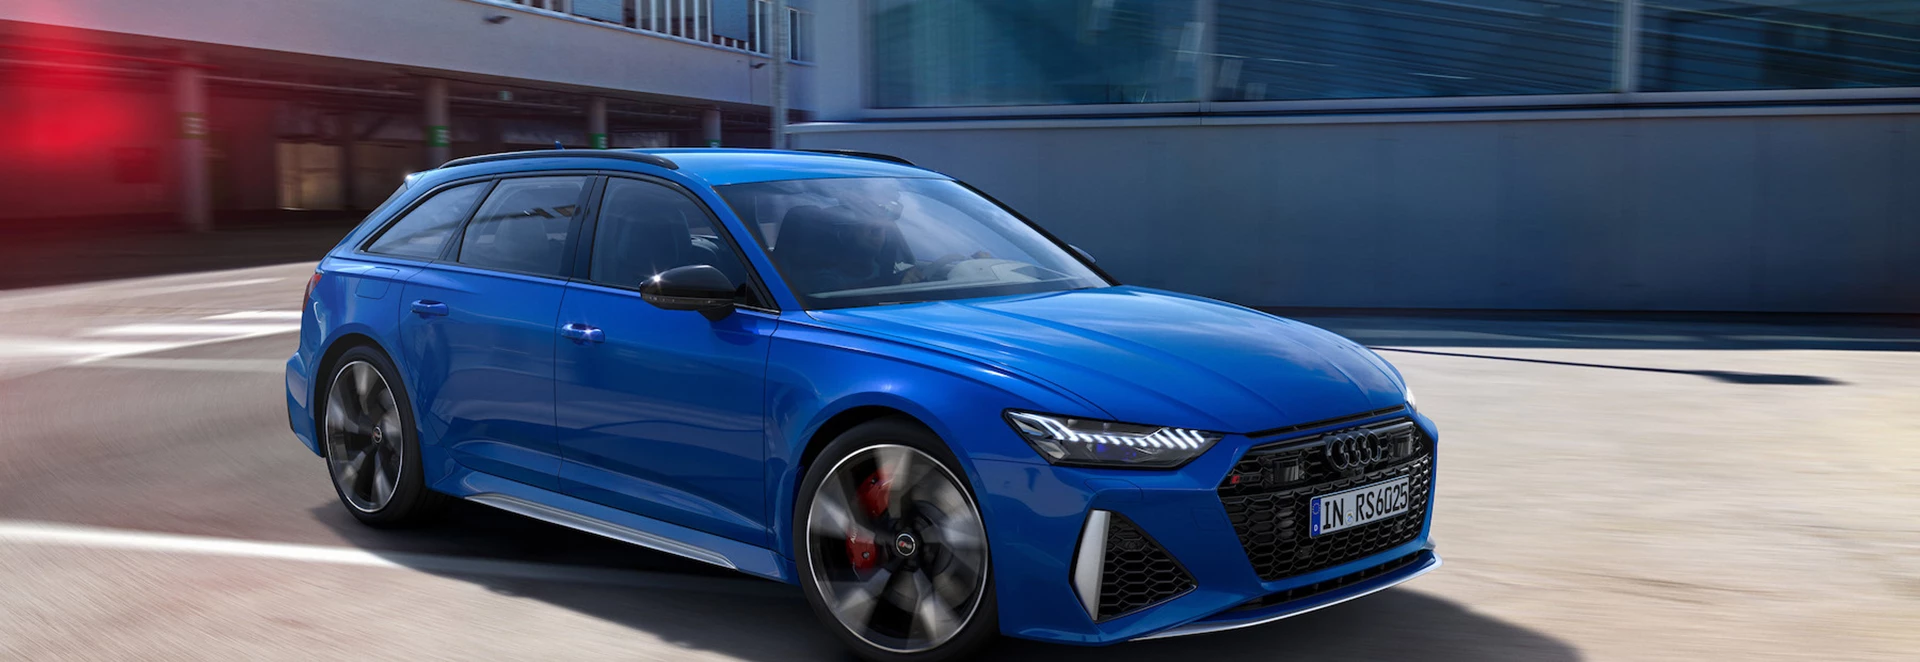 Audi announces special RS package to celebrate 25 years of performance arm